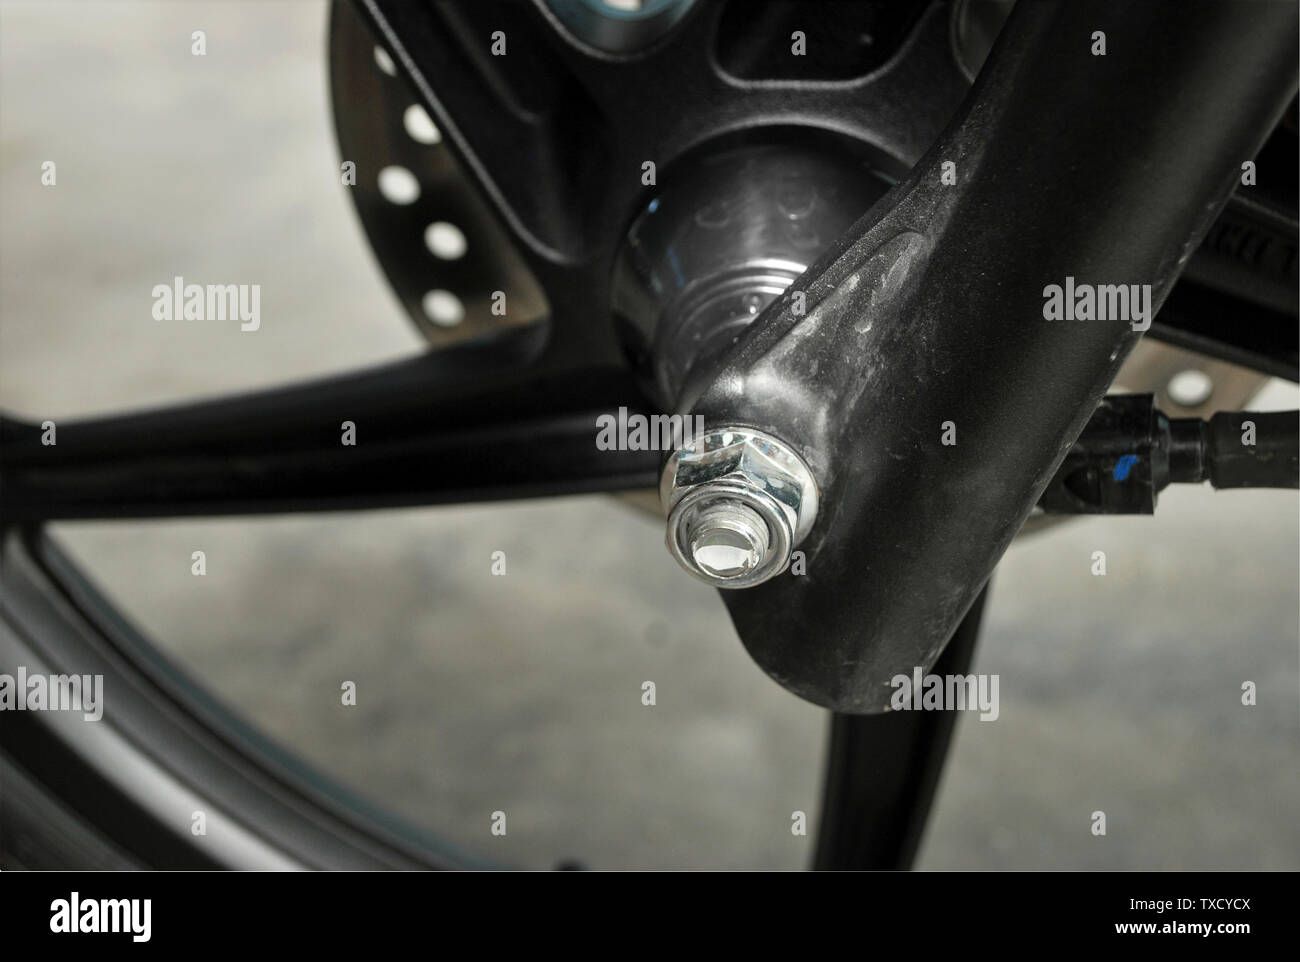 Equipment parts And various parts 4-stroke motorcycle. Stock Photo